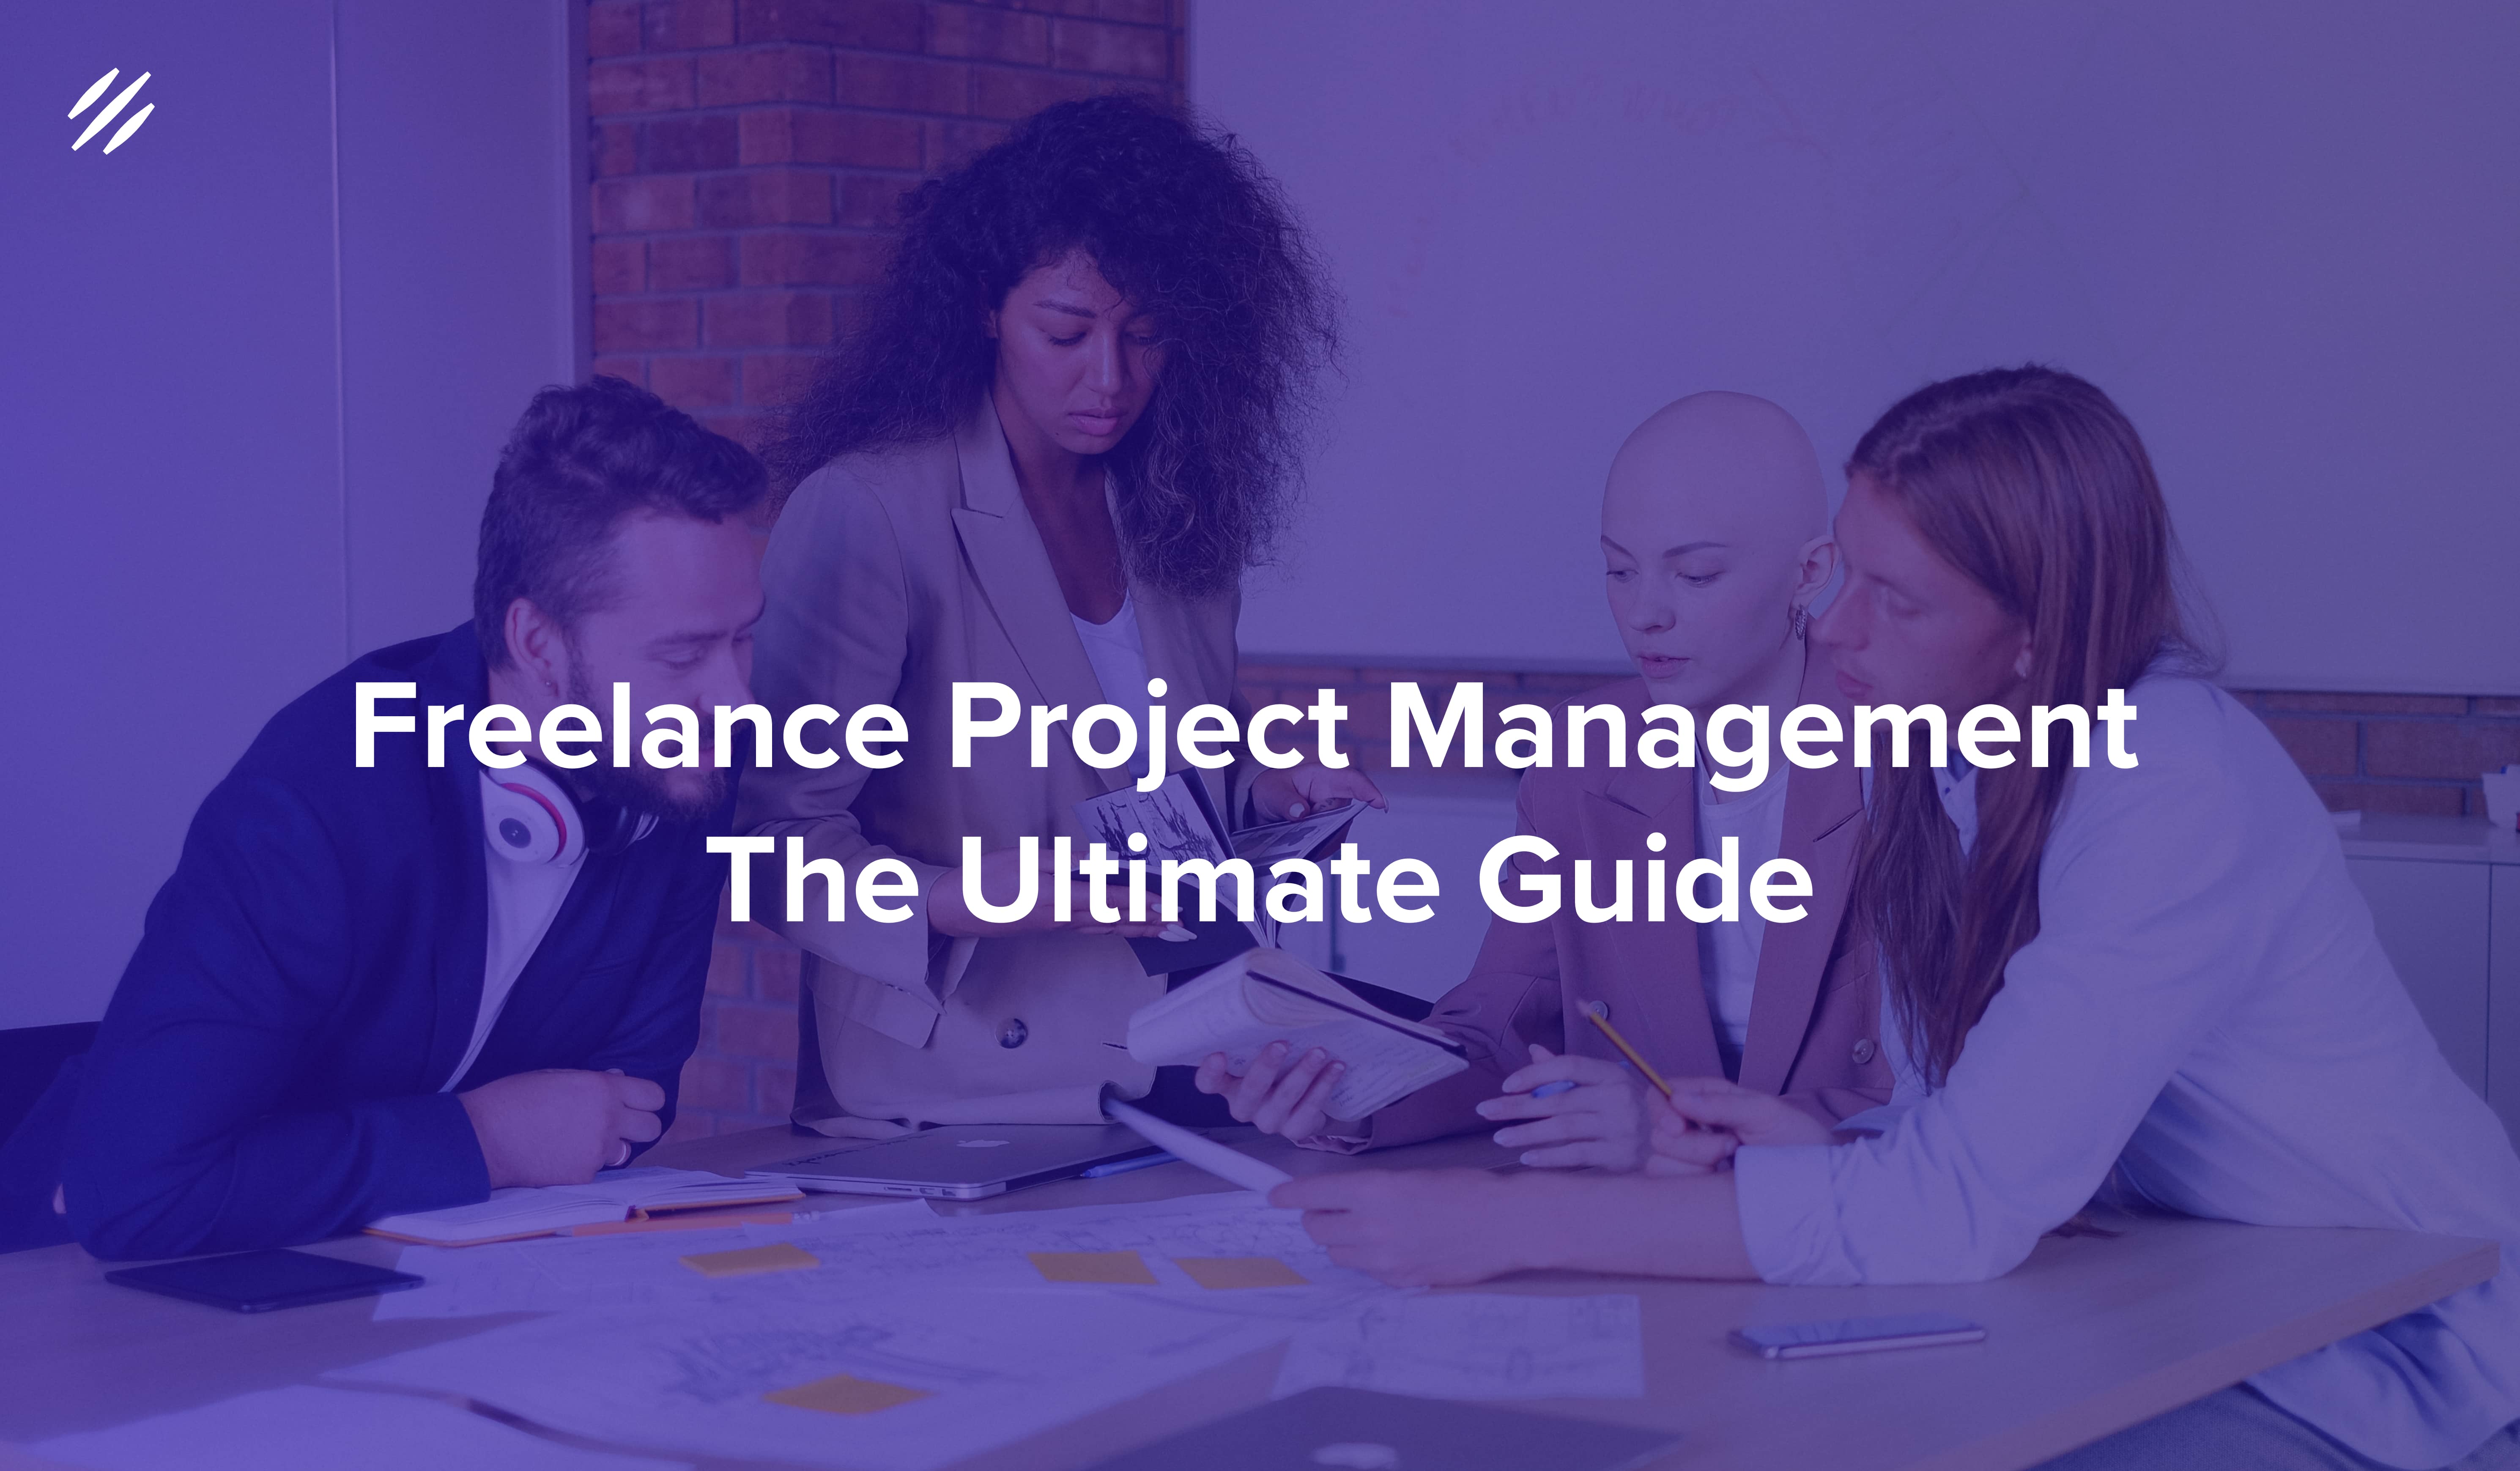 Freelance Project Management — The Ultimate Guide